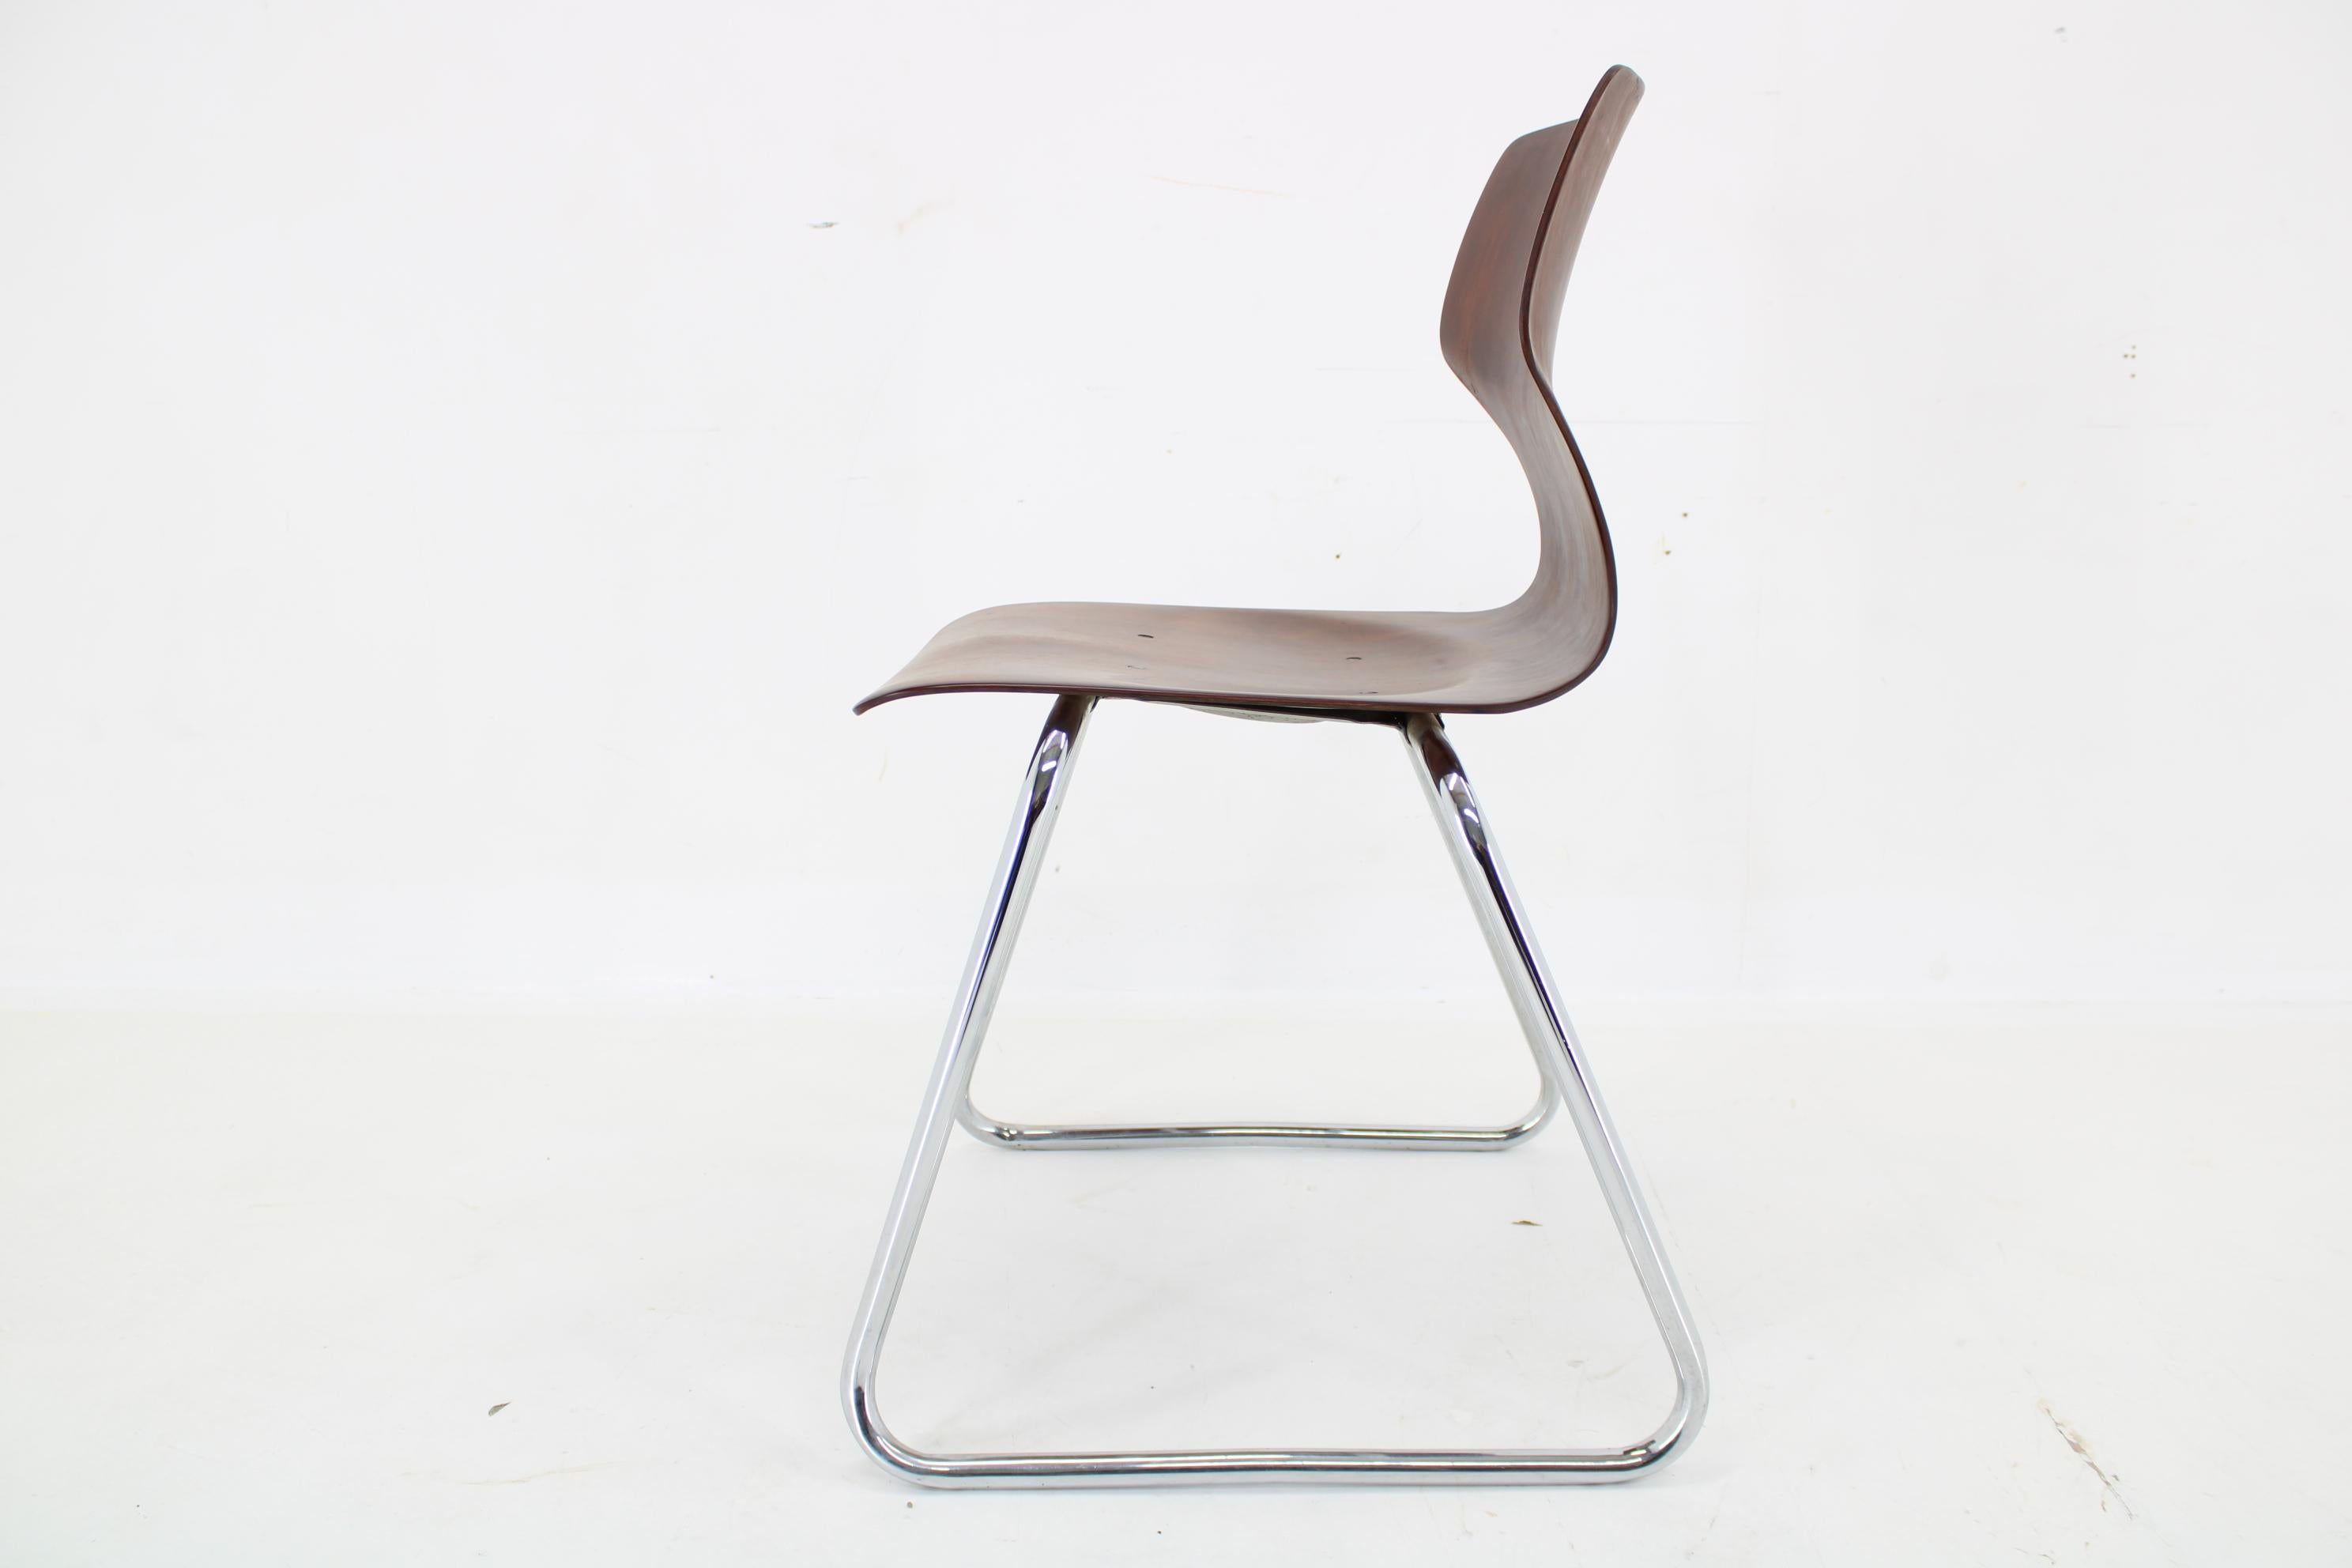 Metal 1970s Elmar Flototto Dining or Side Chair, Germany -40 Pieces Available For Sale